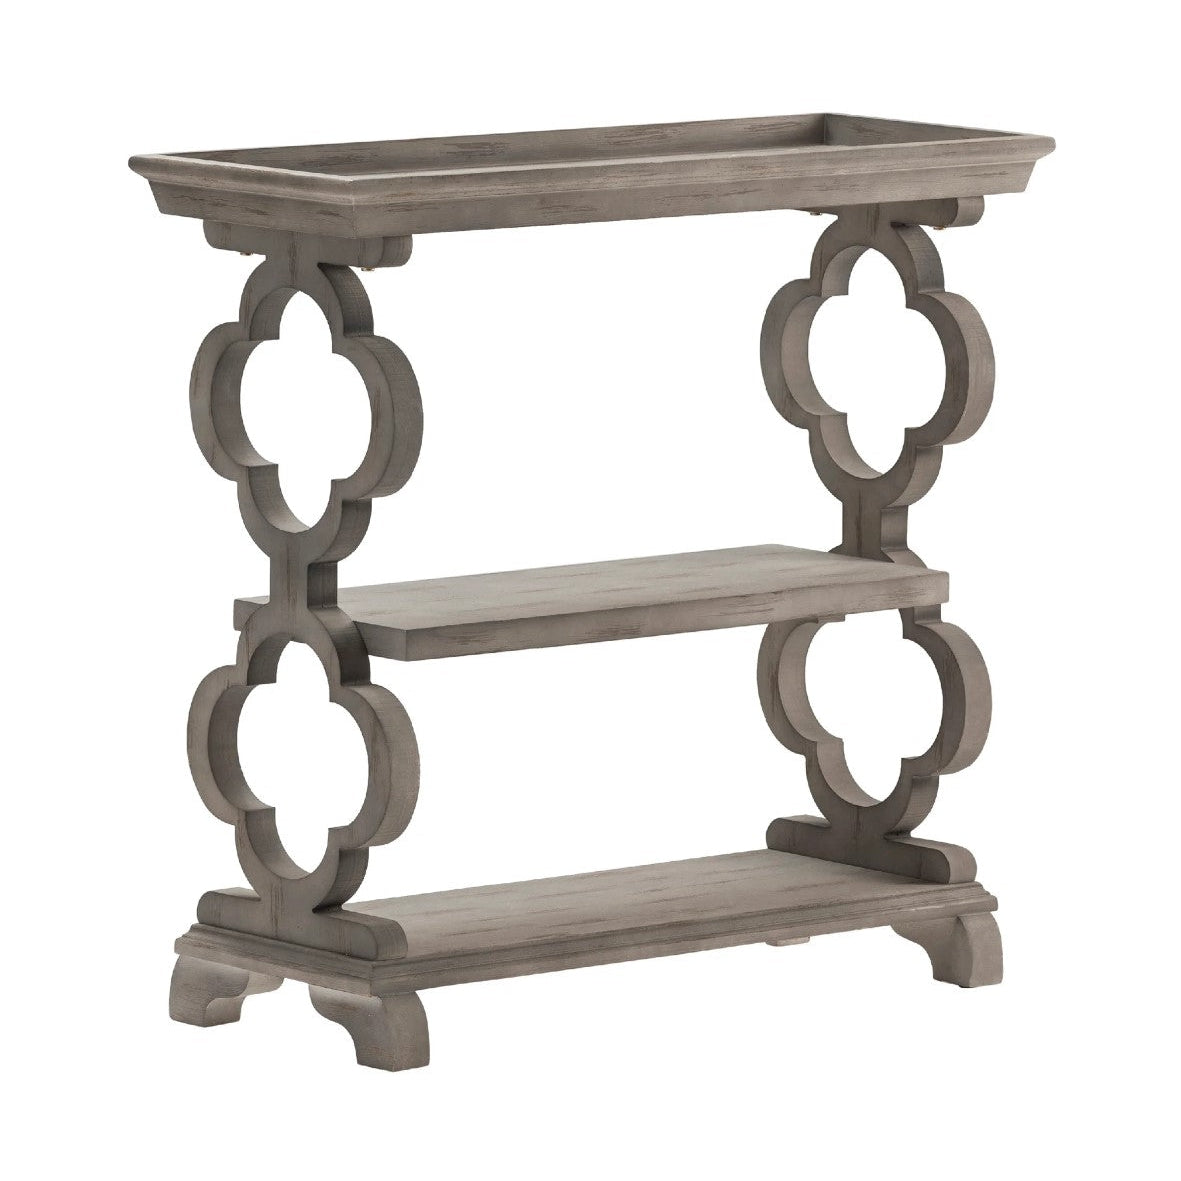 Crestview Collection Chelsea 36" x 14" x 35" Transitional Wood Tray Top Quatrefoil Console Table In Distressed Gray Finish